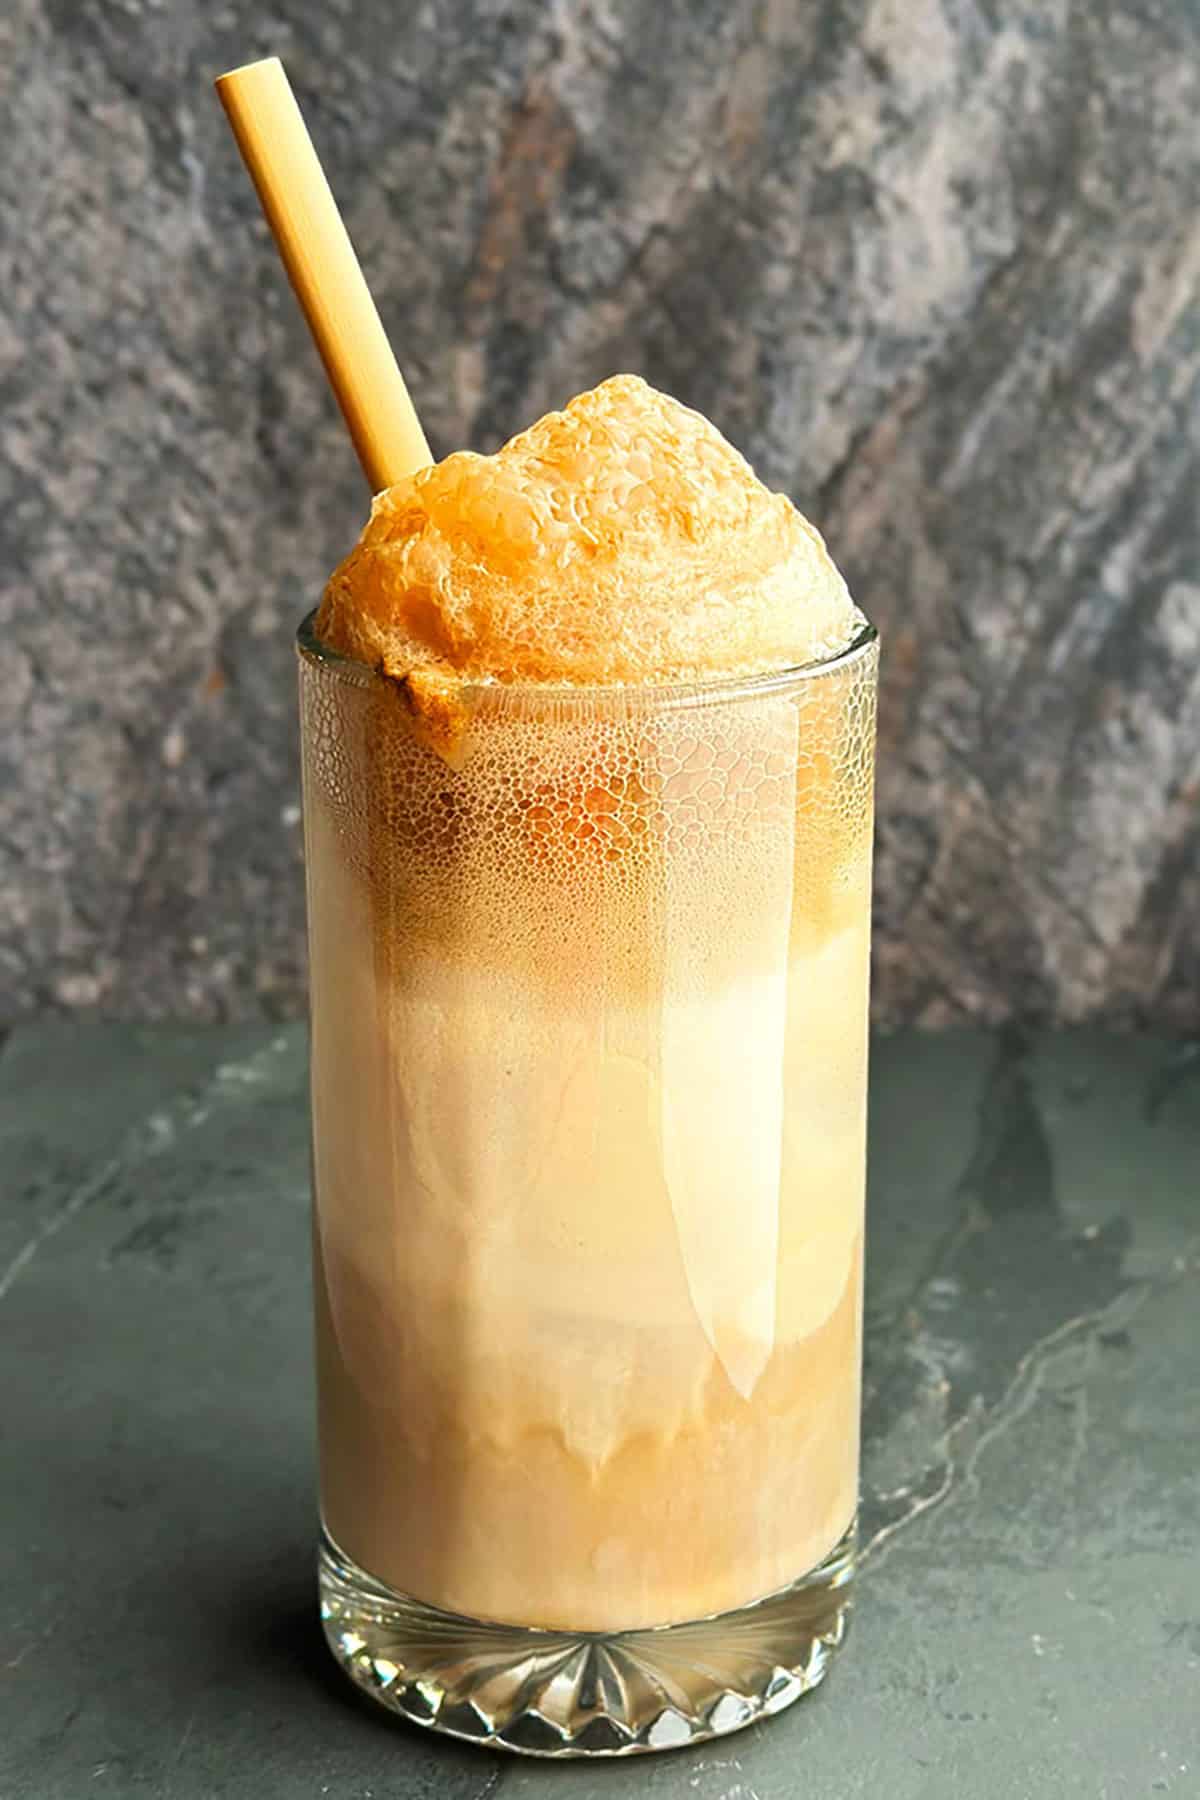 Easy Root Beer Float in Big Glass Mug  on Rustic Gray Background